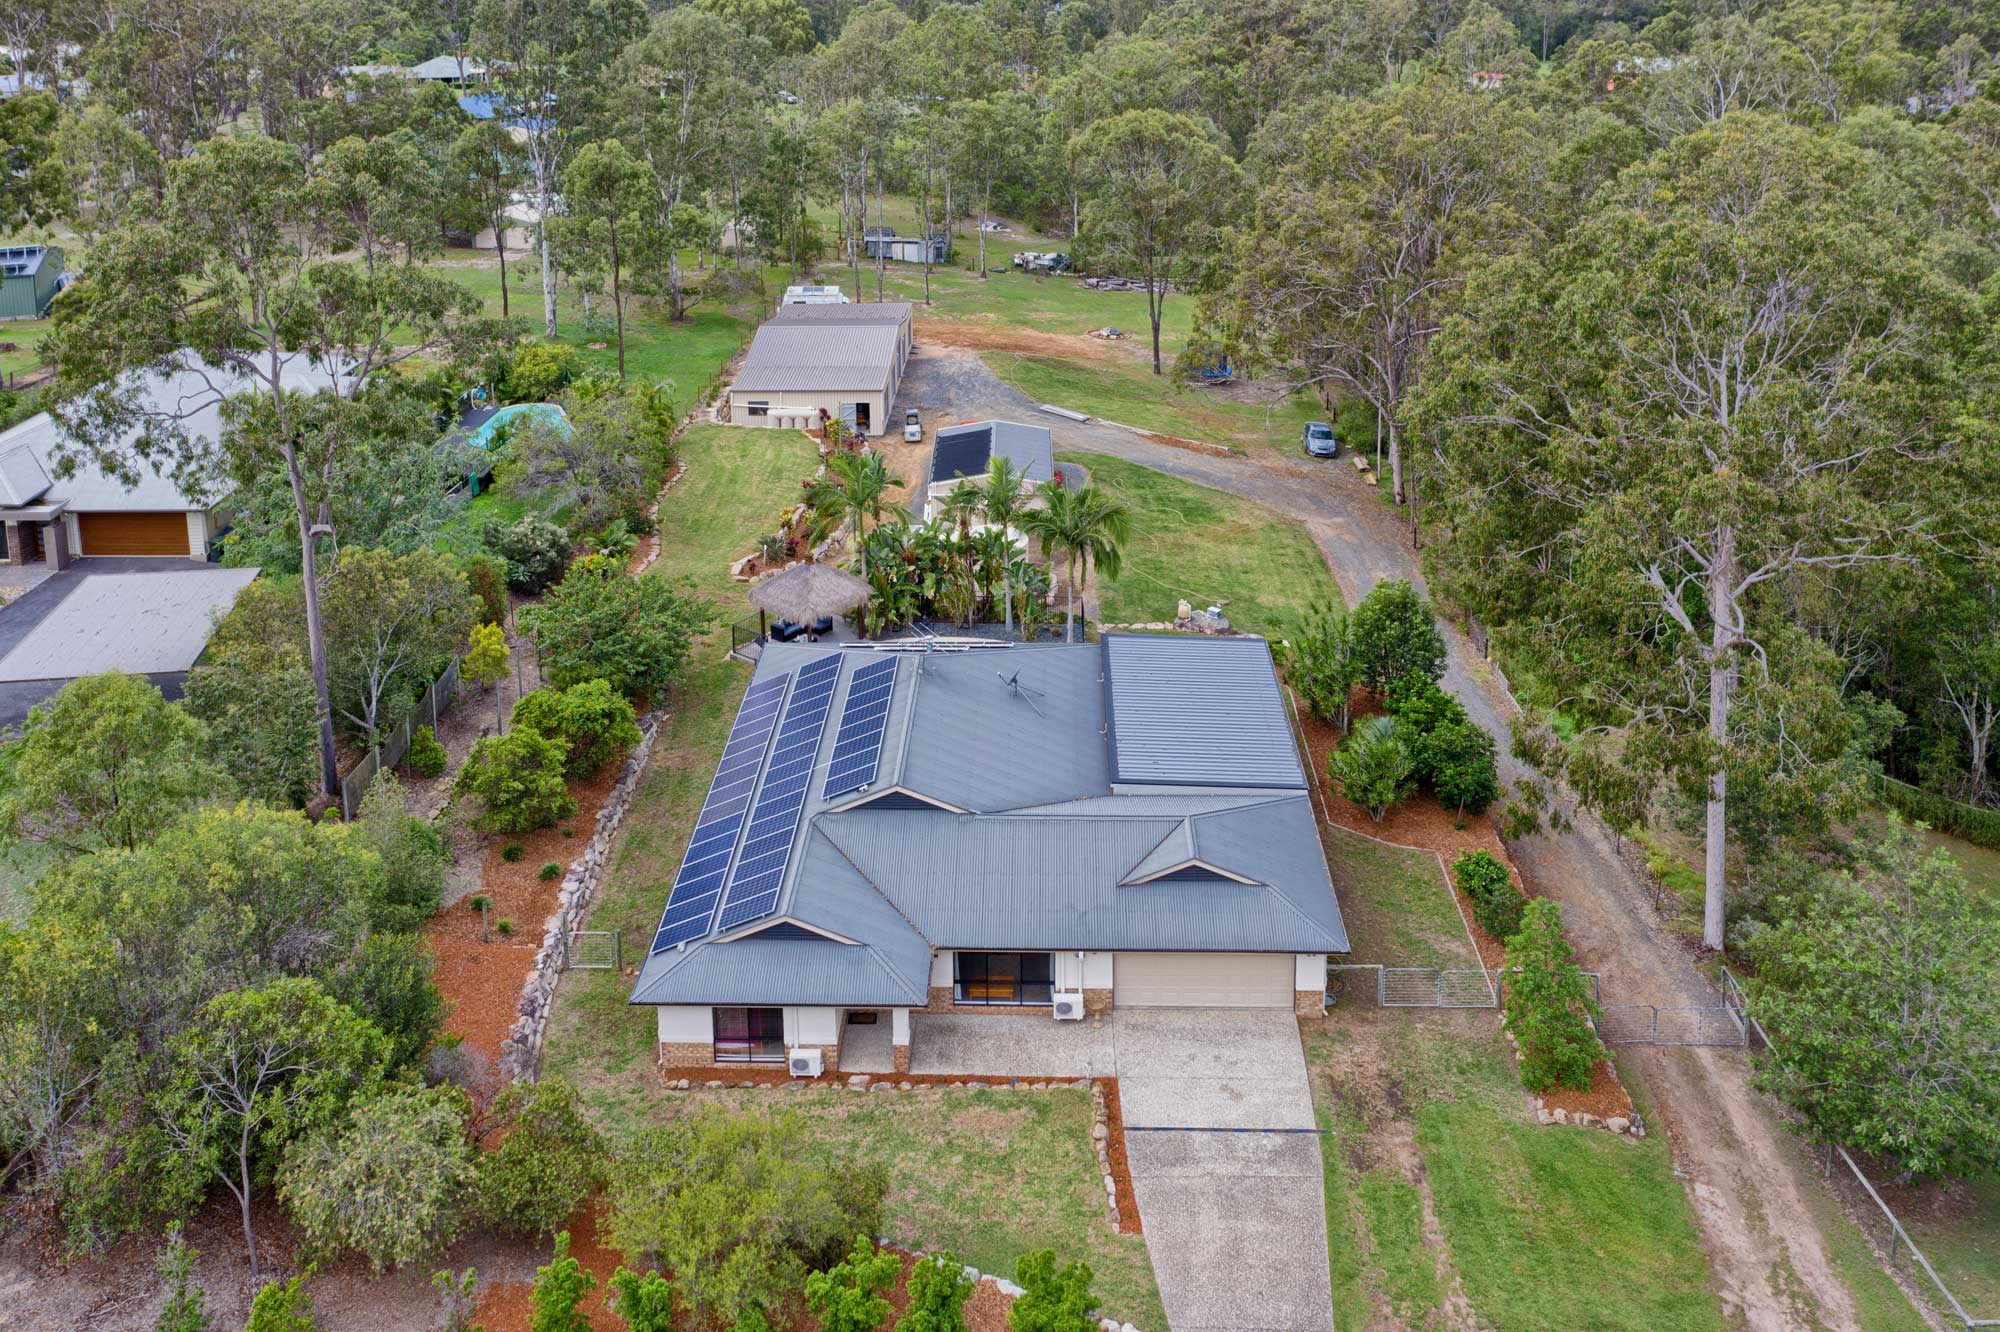 Drone photography at 152 Peppertree Drive Jimboomba - the main residence